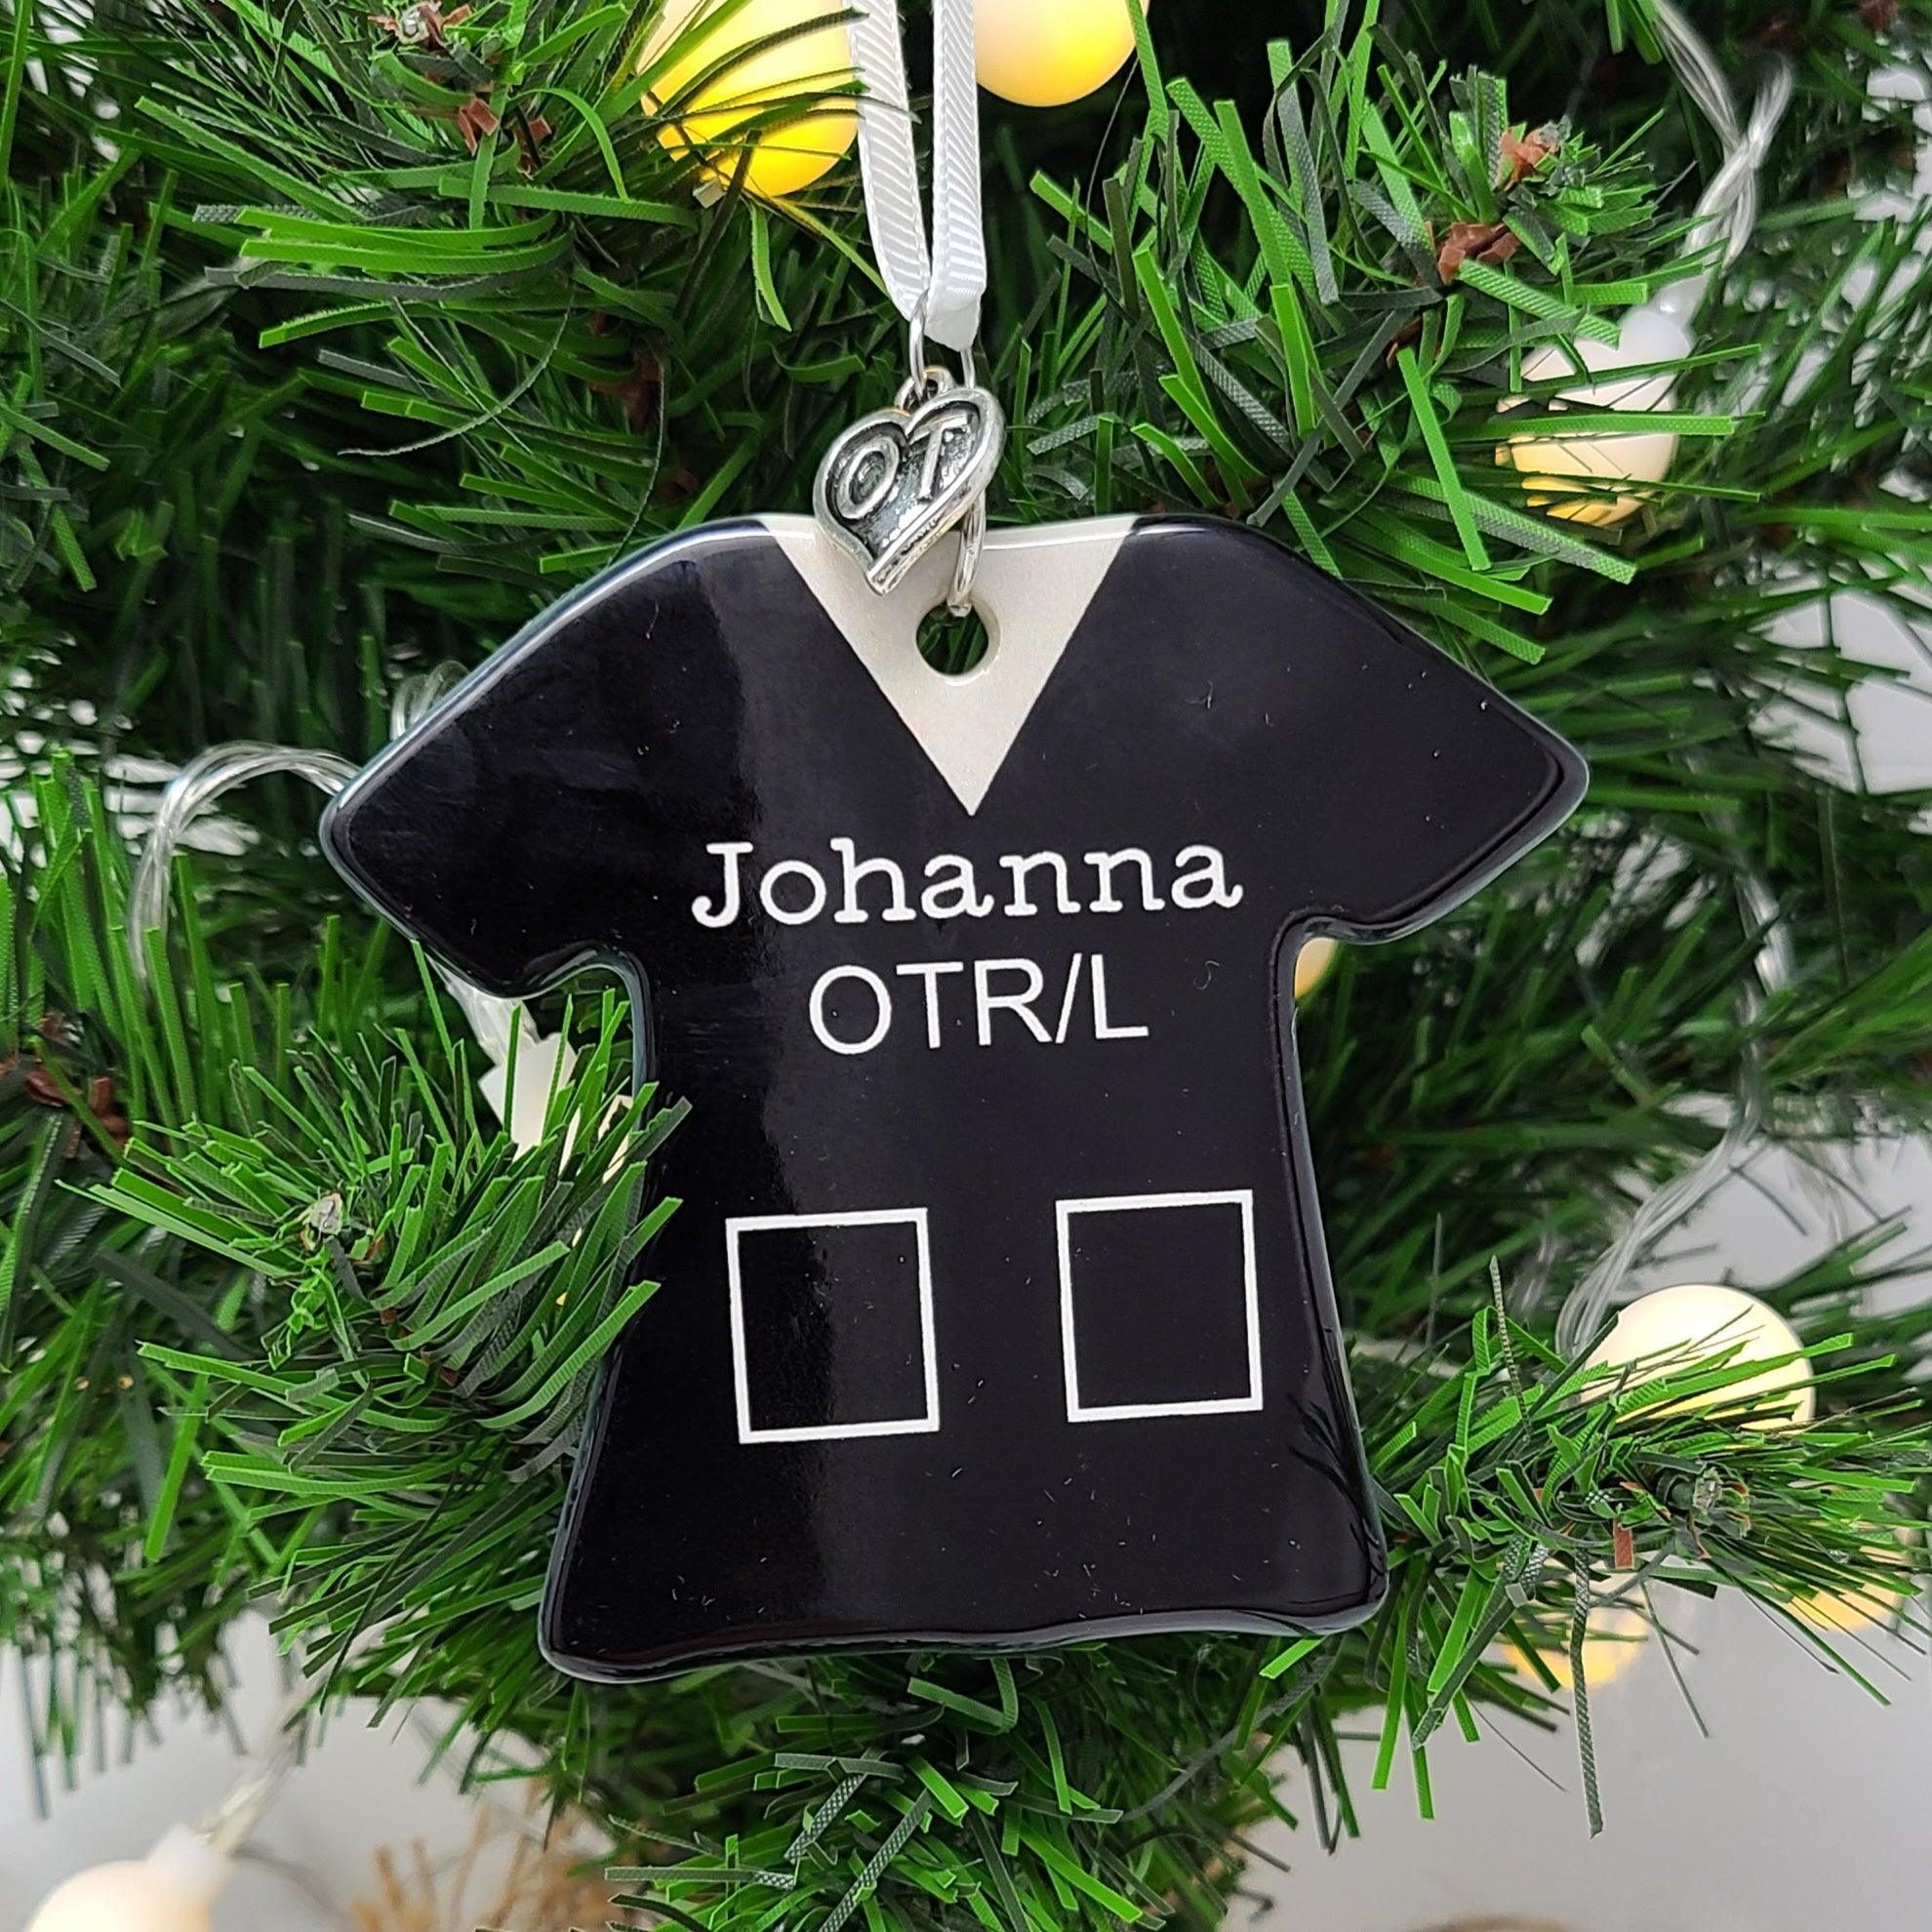 Occupational Therapist ornament, personalized OTR/L ornament, OT ornament, gift for Occupational Therapist